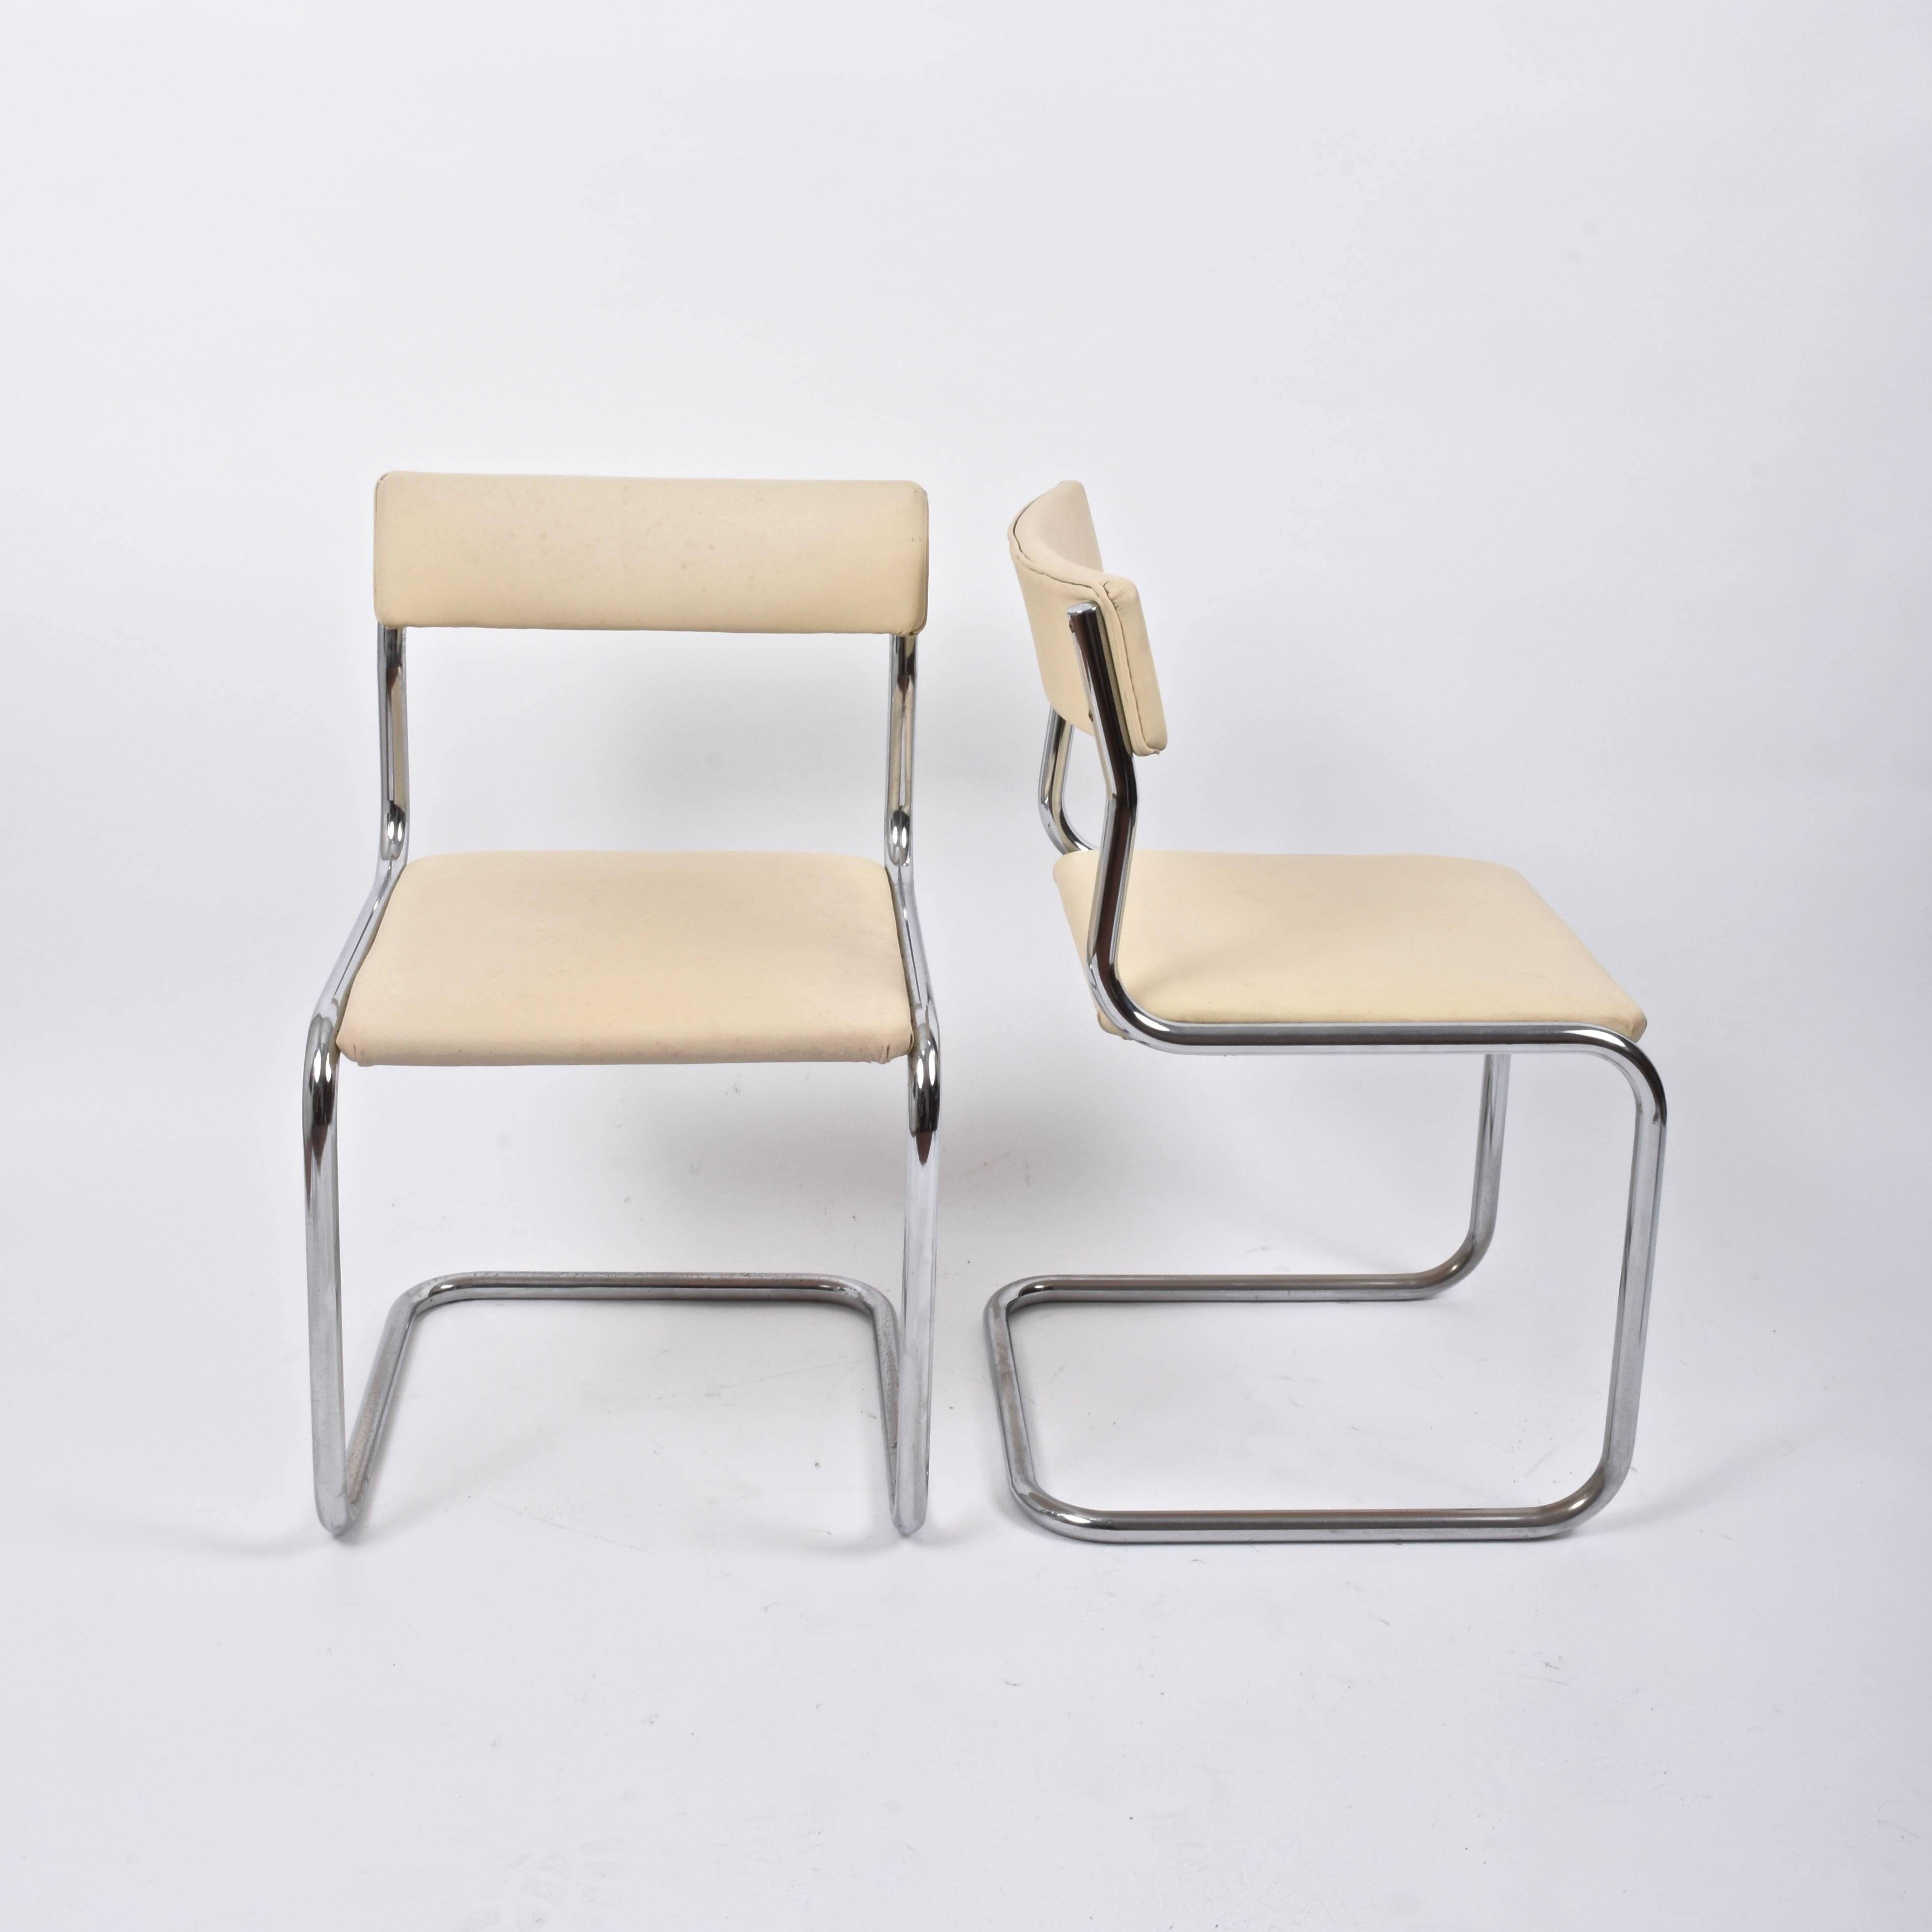 20th Century Bauhaus Metal and White Faux Leather Italian Chairs in Breuer Style, 1970s